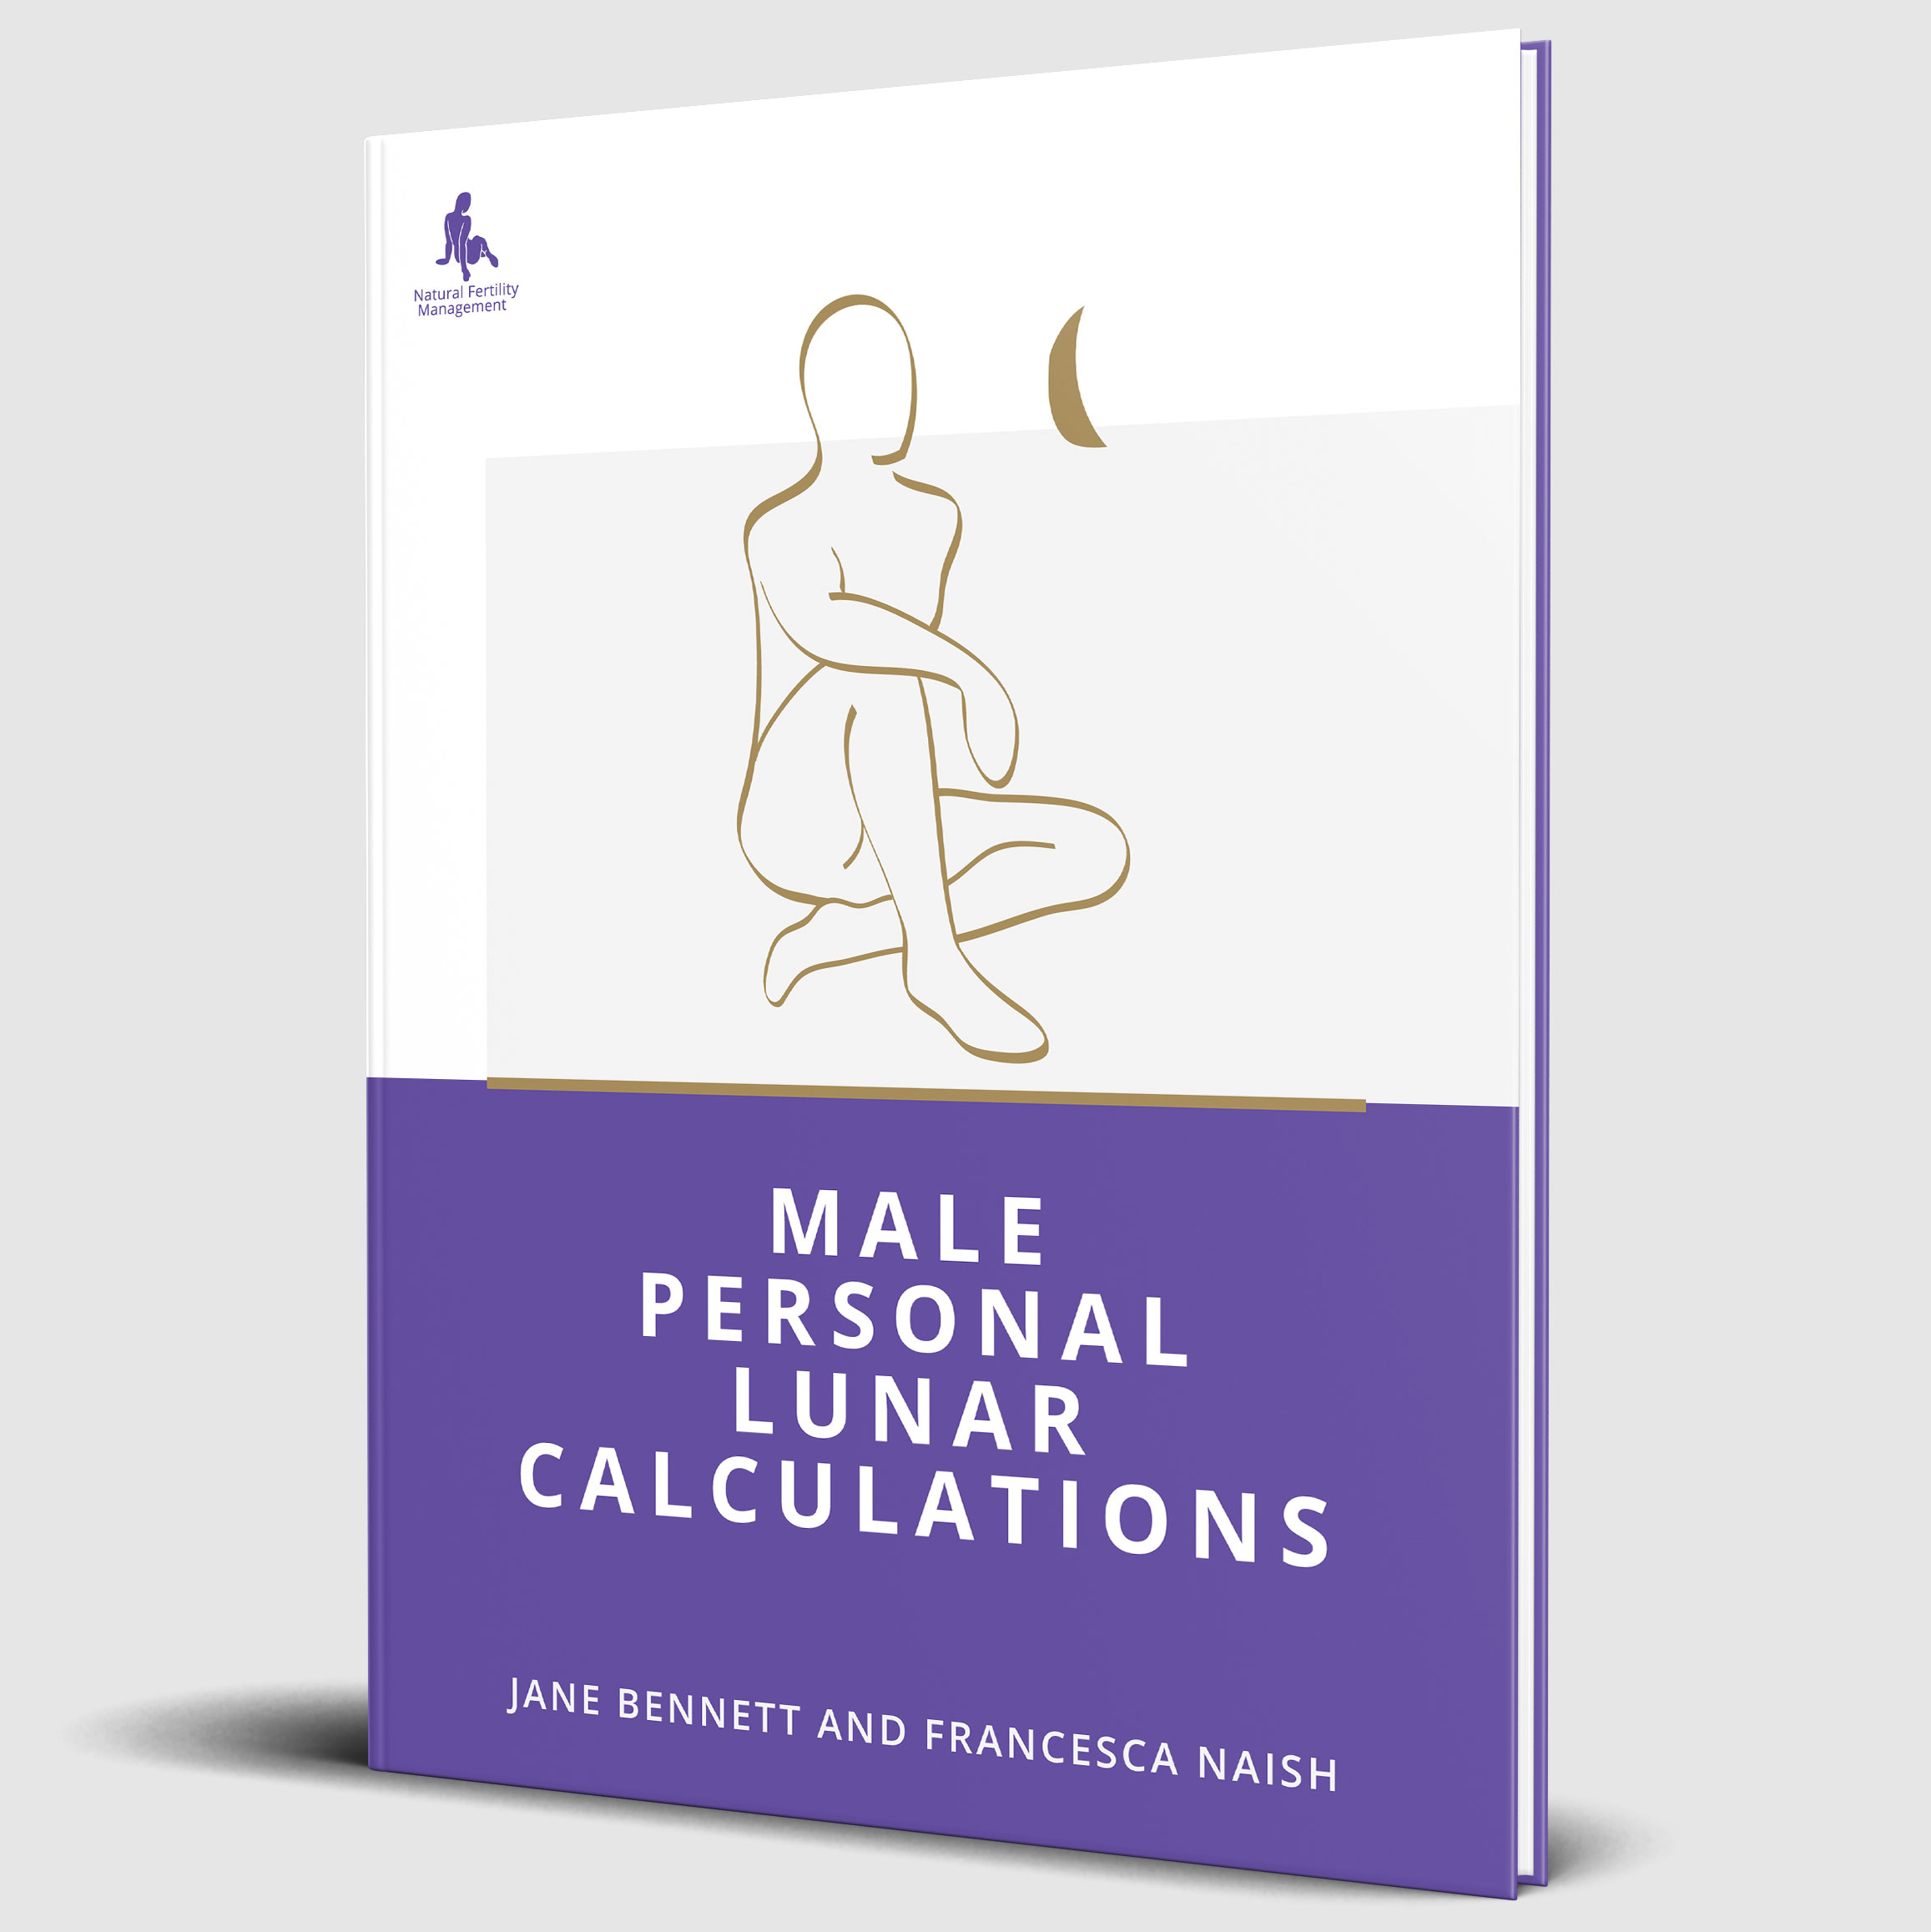 Male fertility peaks at the personal lunar return, which can lead to a spike in sperm count. These calculations are an interesting way to observe their personal lunar return, which Traditional Chinese Medicine cites as a time of peak Qi.